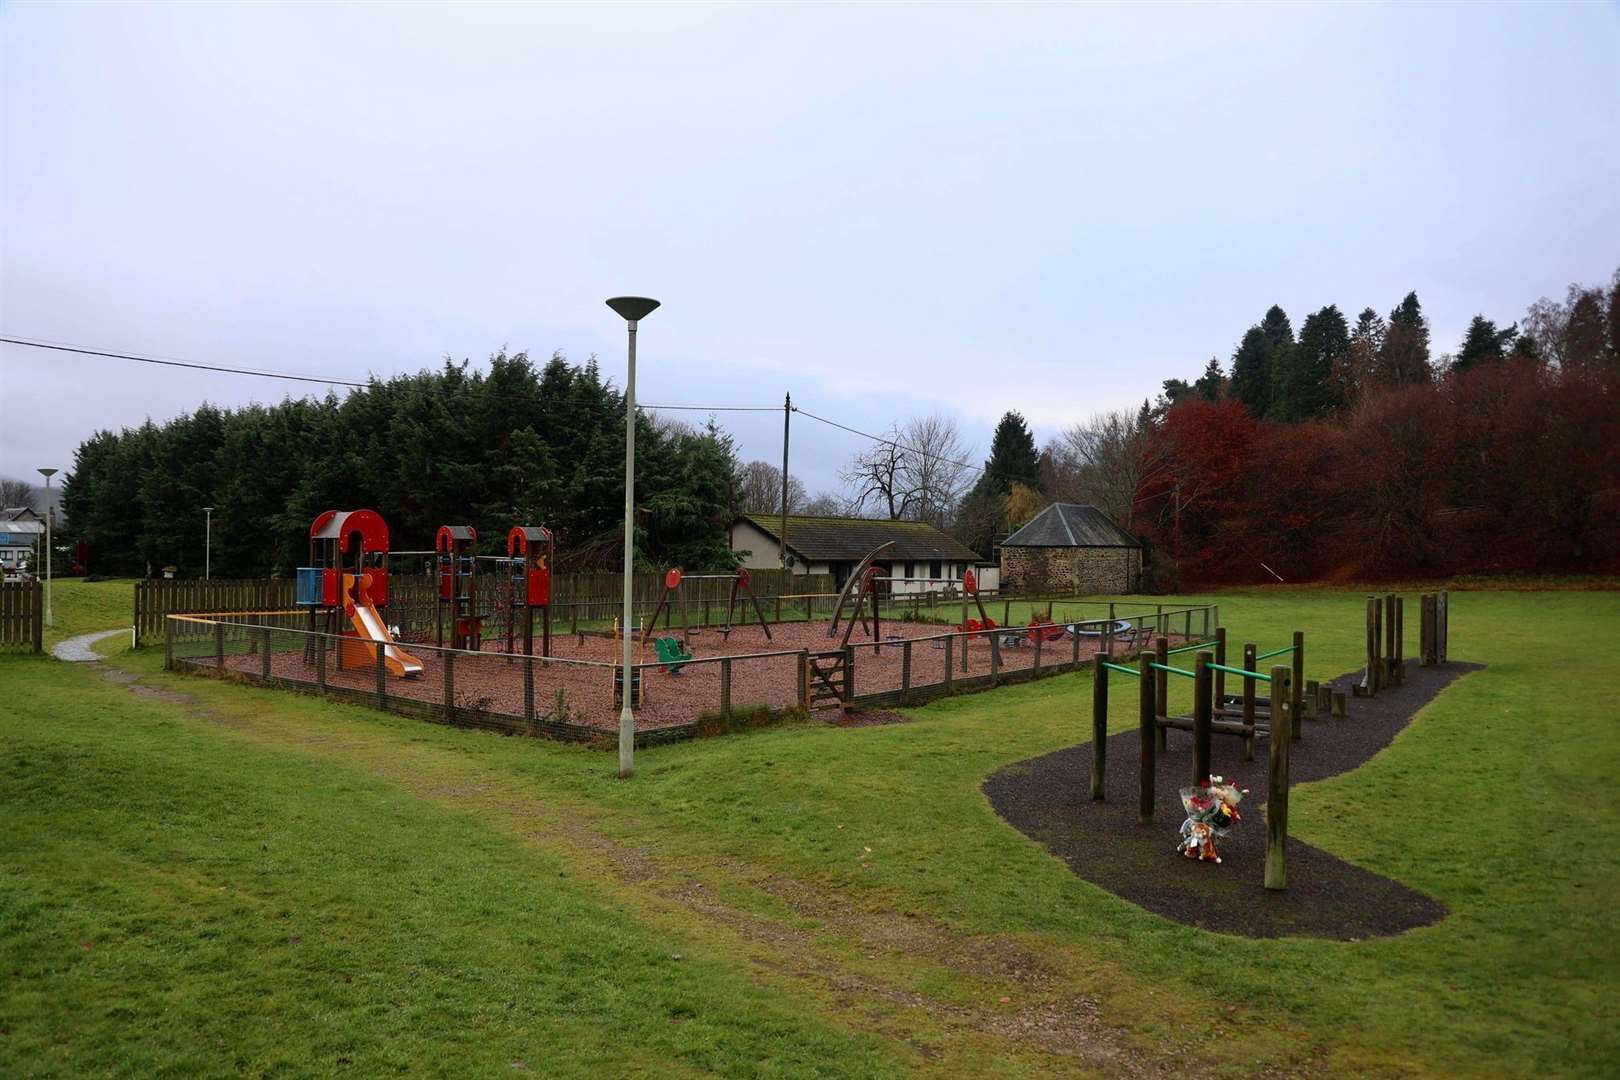 The playpark at Kingussie where the tragedy occurred on Friday